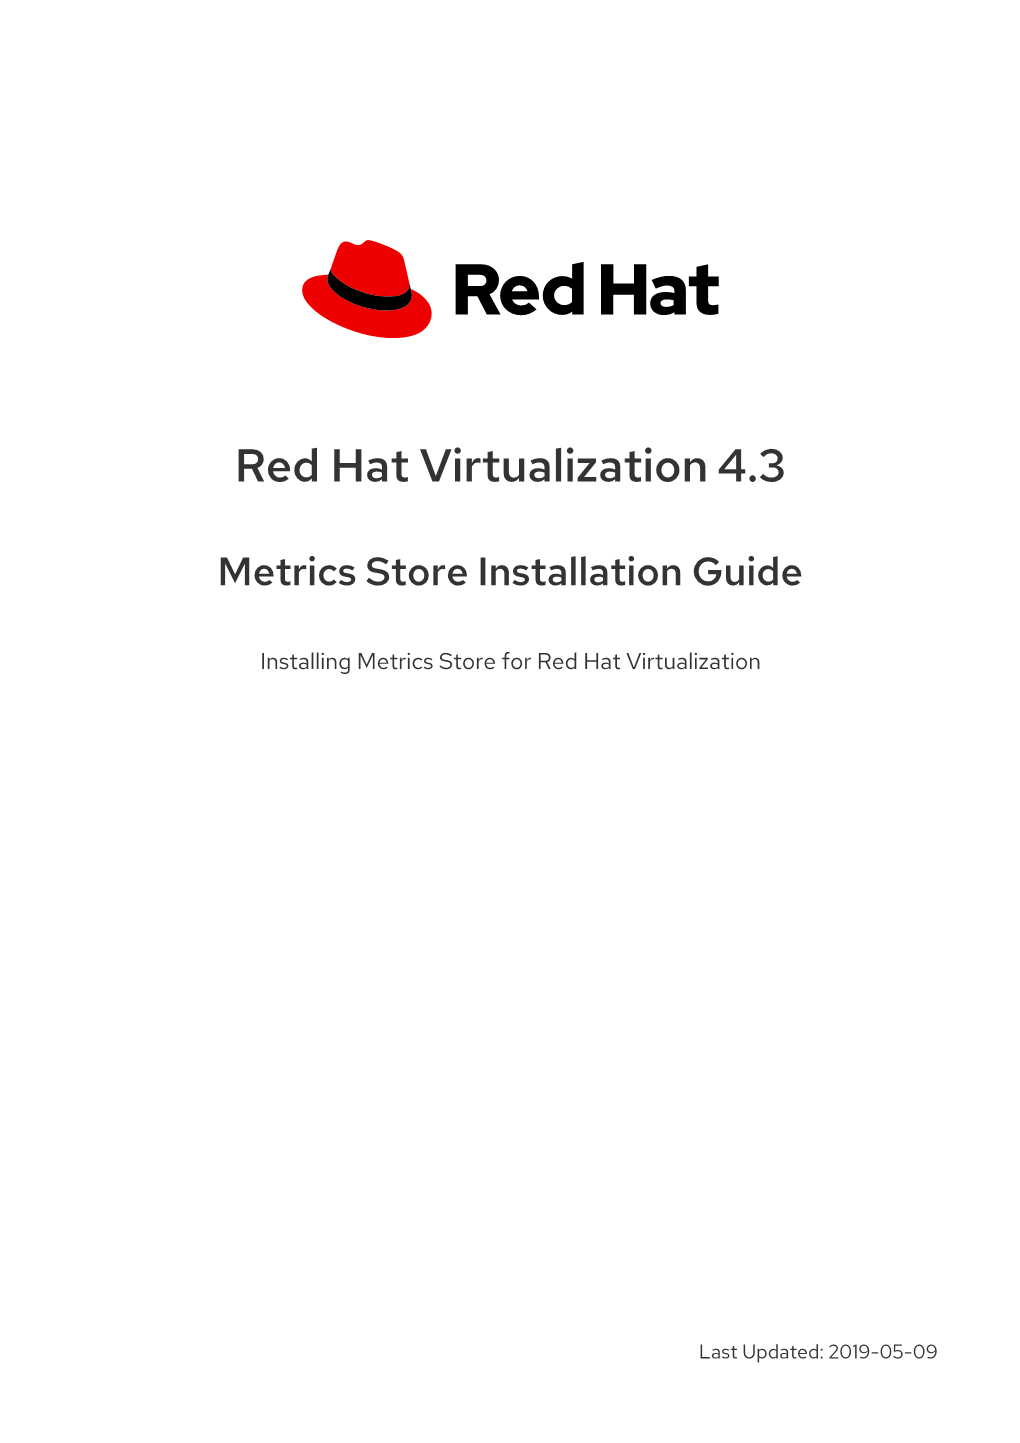 Red Hat Virtualization 4.3 Metrics Store Installation Guide